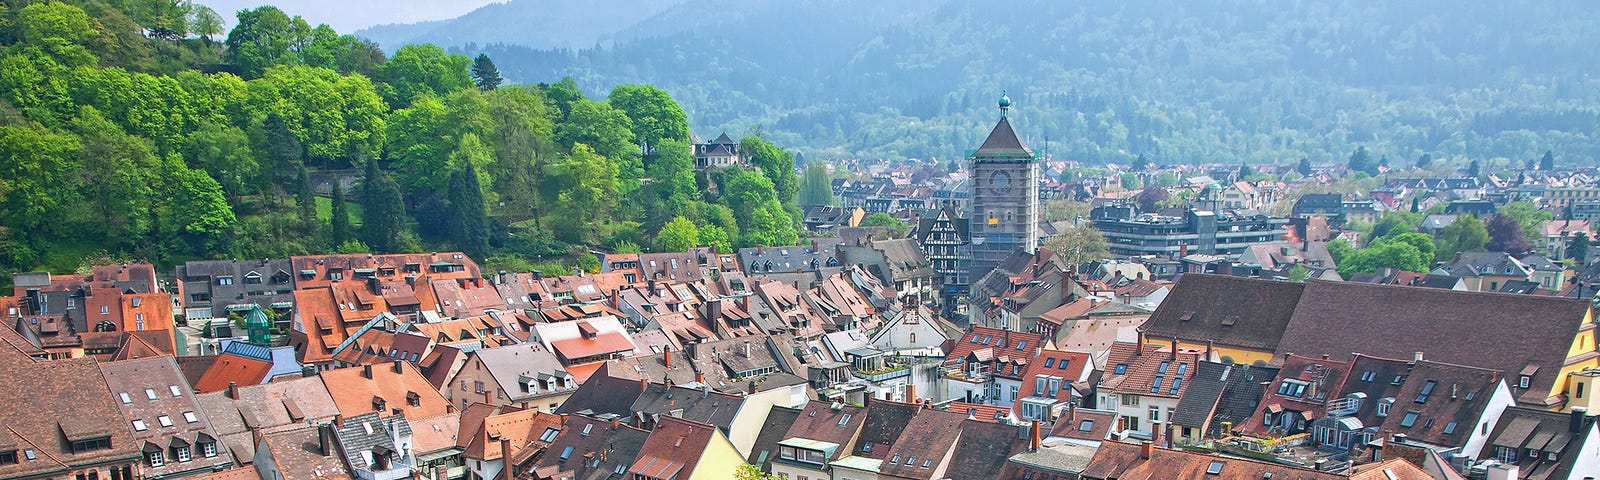 Freiburg - the sunniest city in Germany 